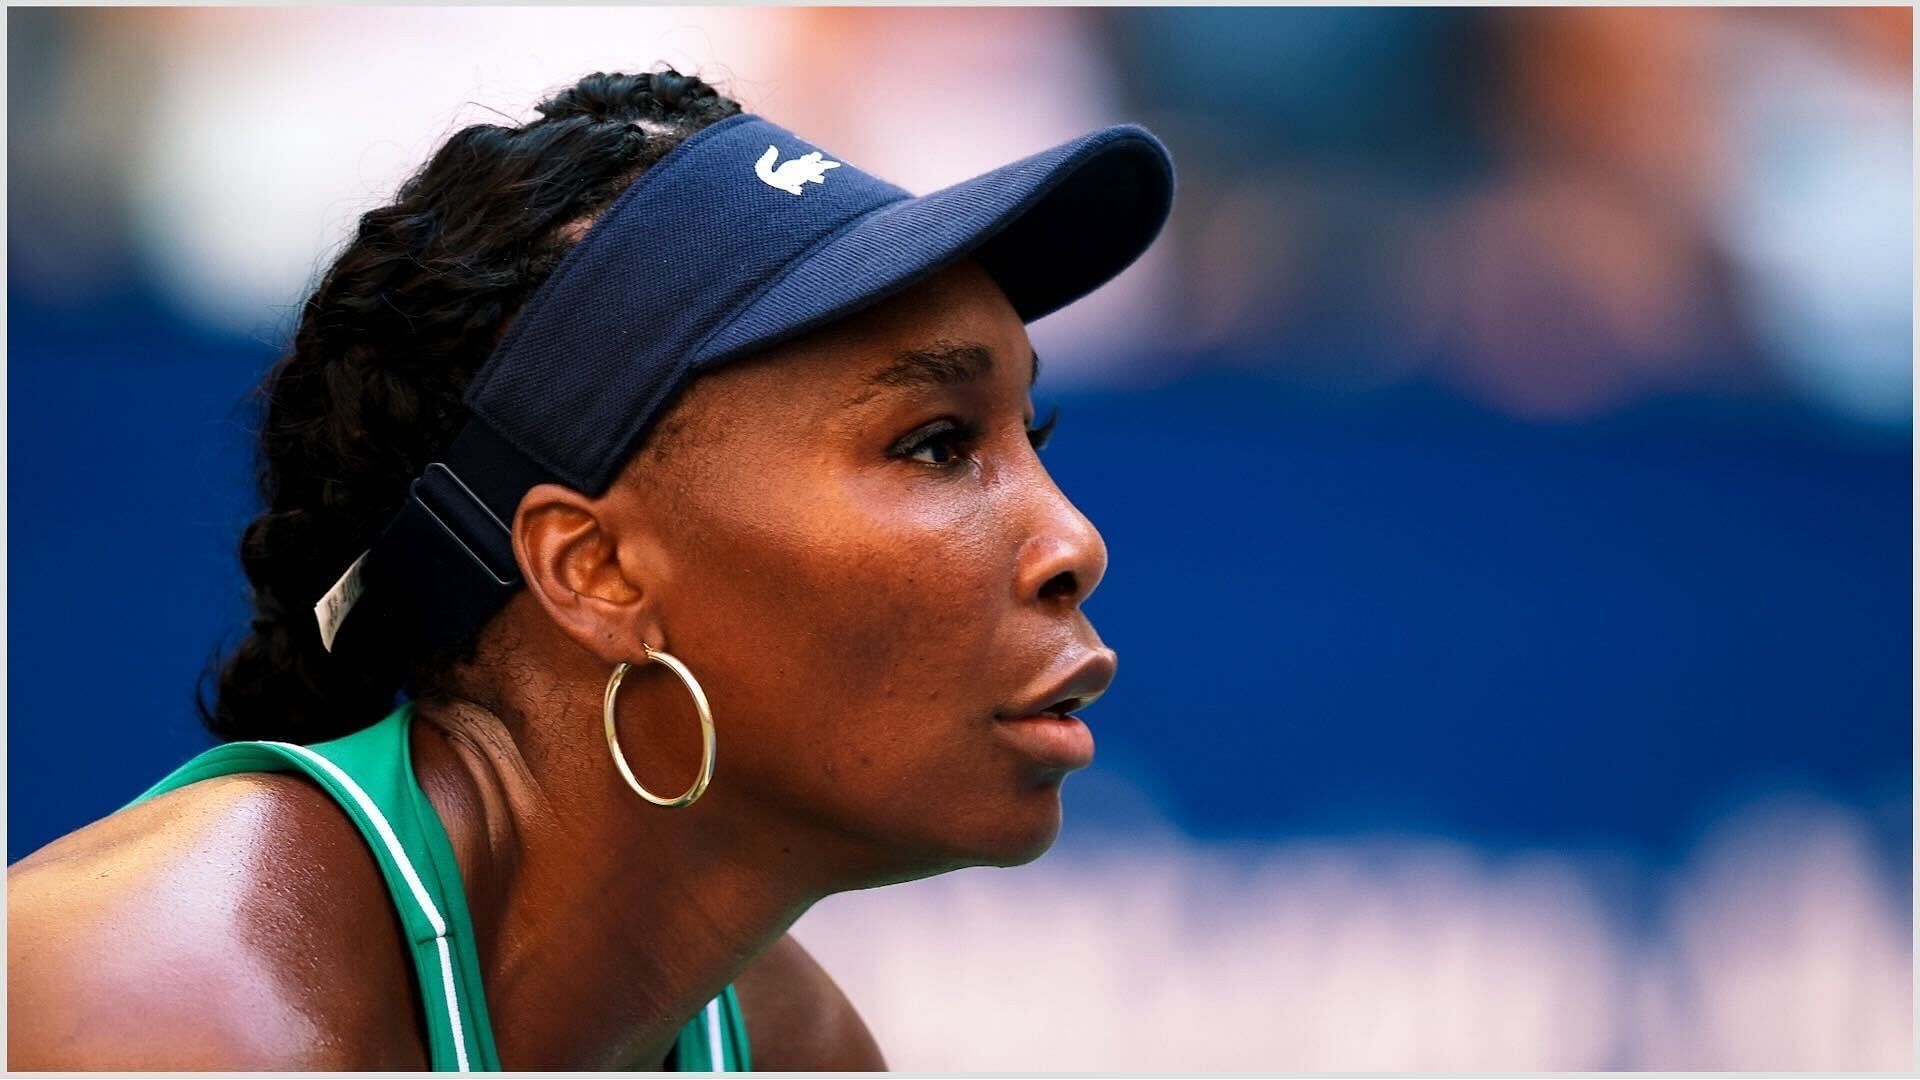 Venus Williams shares an update on her comeback